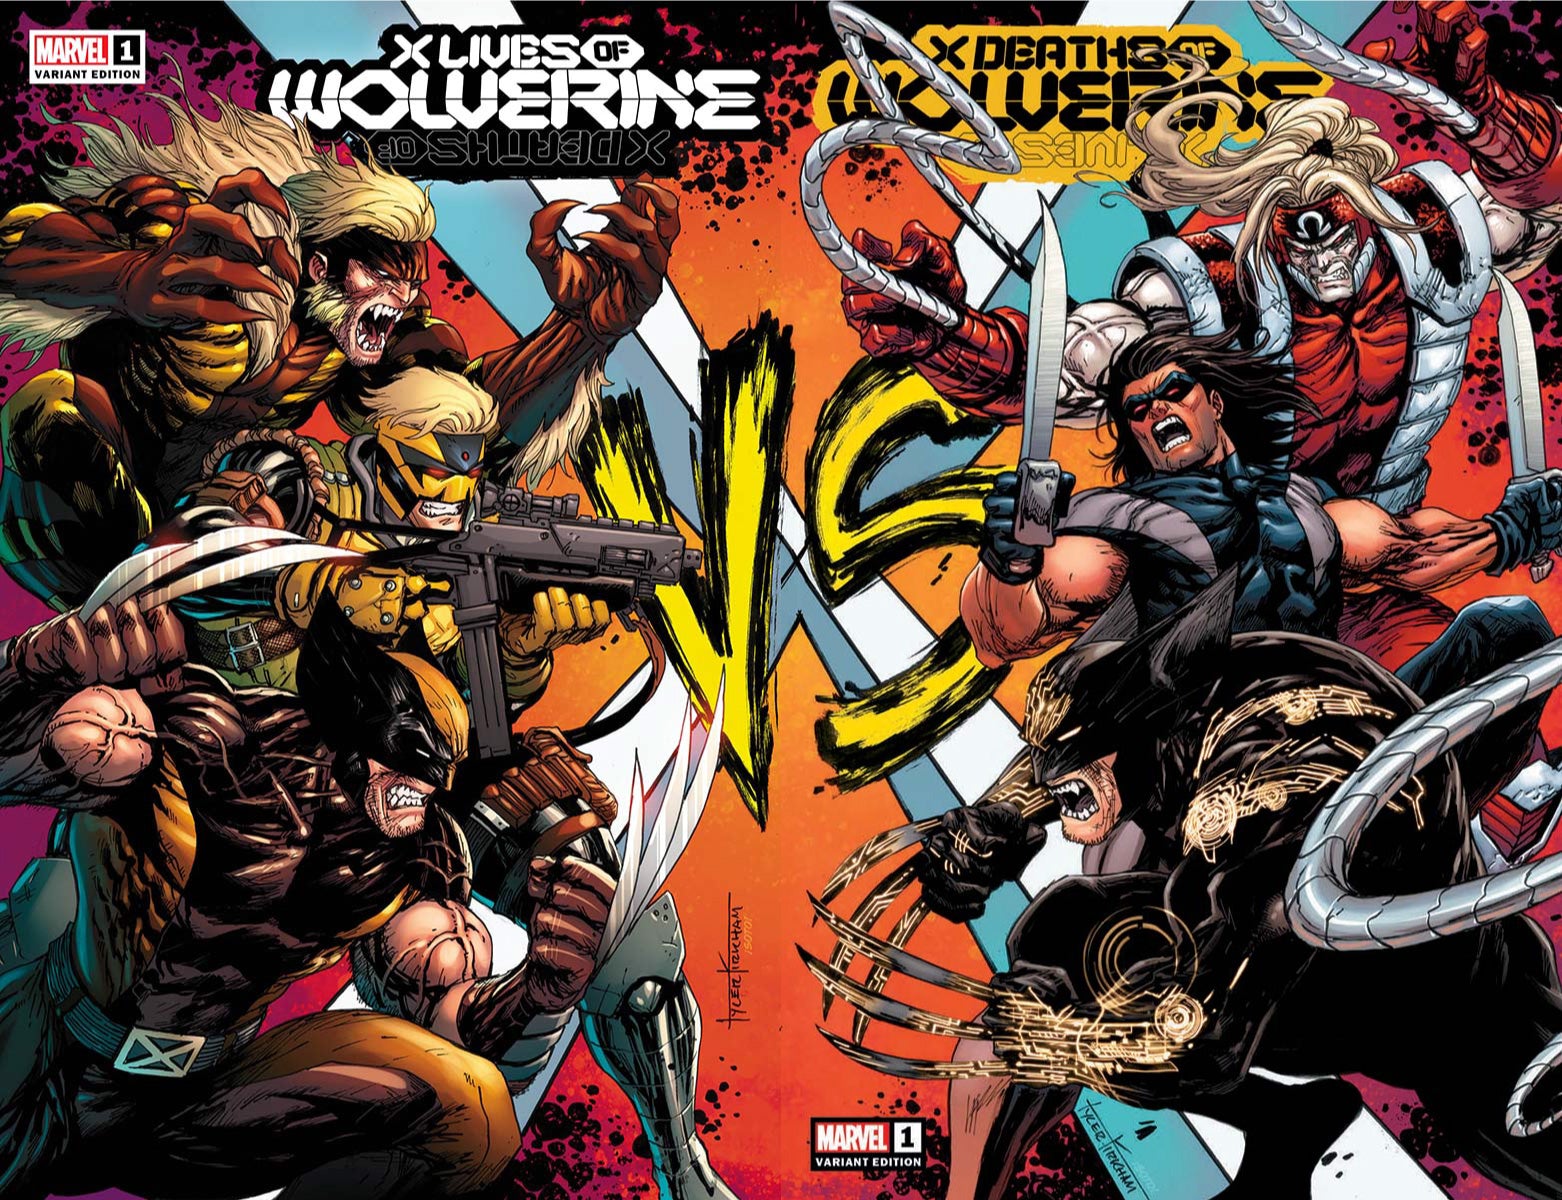 2 PACK X LIVES OF WOLVERINE 1 / X DEATHS OF WOLVERINE 1 UNKNOWN COMICS TYLER KIRKHAM EXCLUSIVE VAR (01/26/2022)